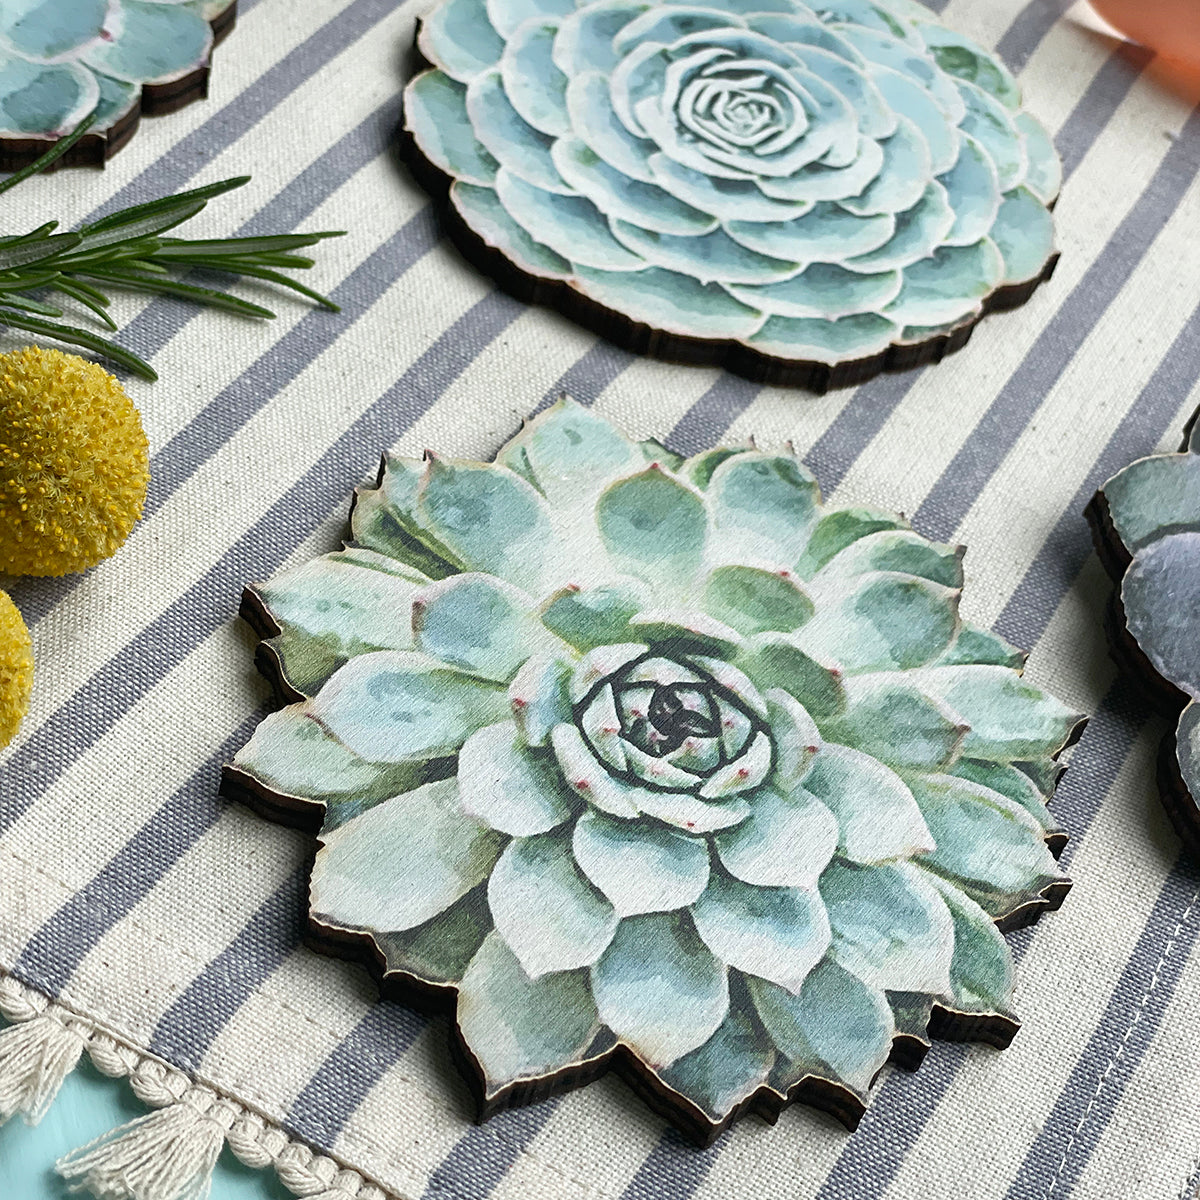 Wooden coasters in the shape and colours of different succulent plants